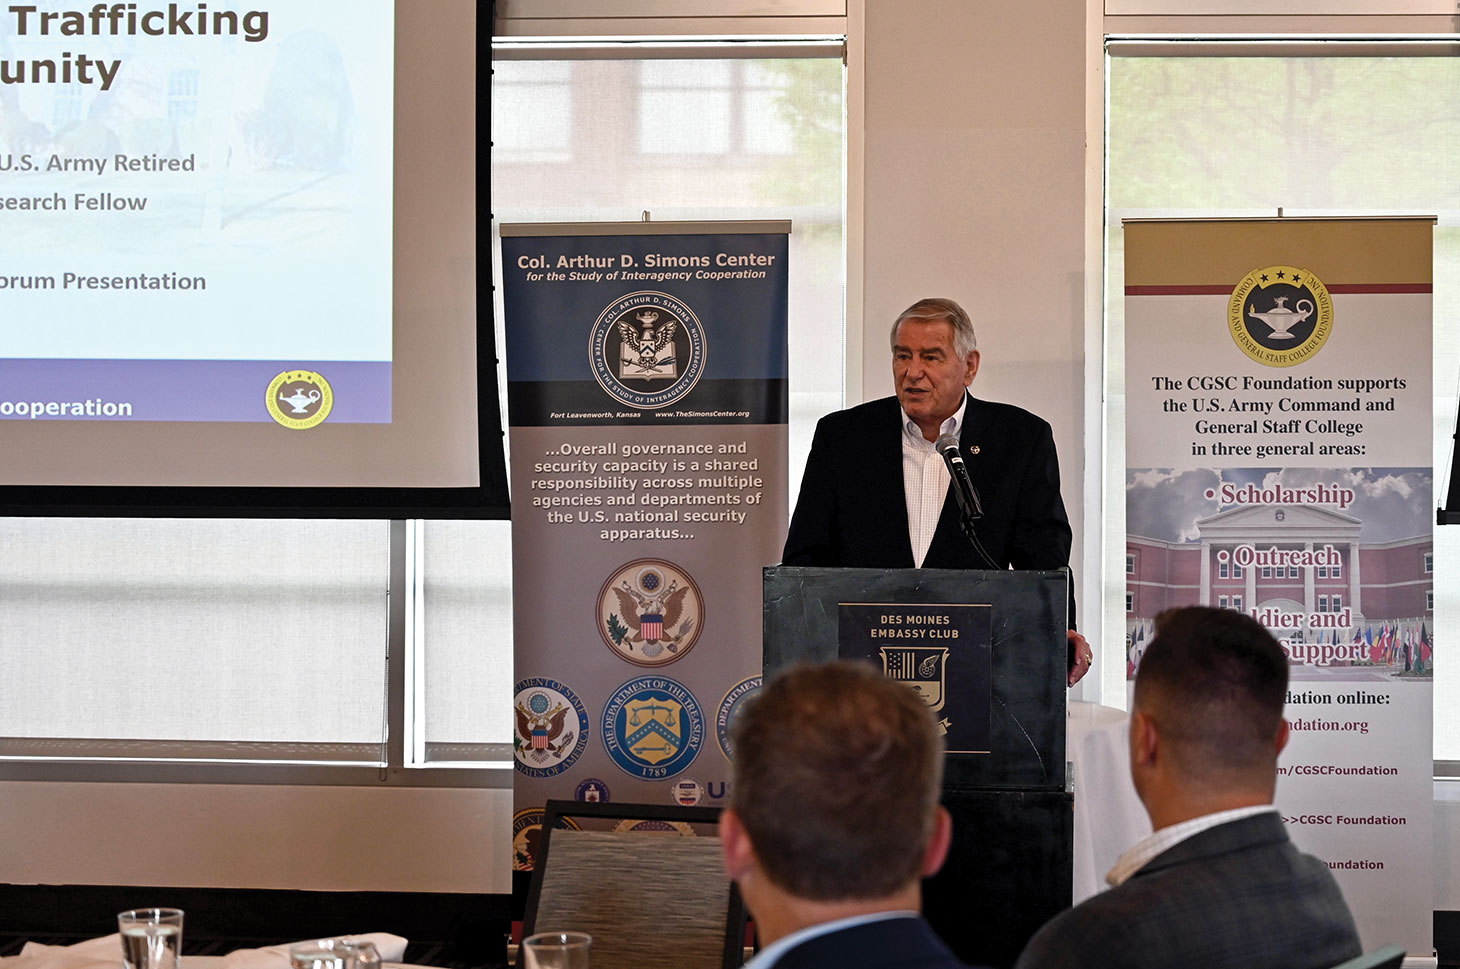 Simons Center Founder and current Director Col. (Ret.) Bob Ulin provides background information about the CGSC Foundation and the Simons Center during the Simons Center National Security Forum at the Des Moines Embassy Club West on May 20, 2021.